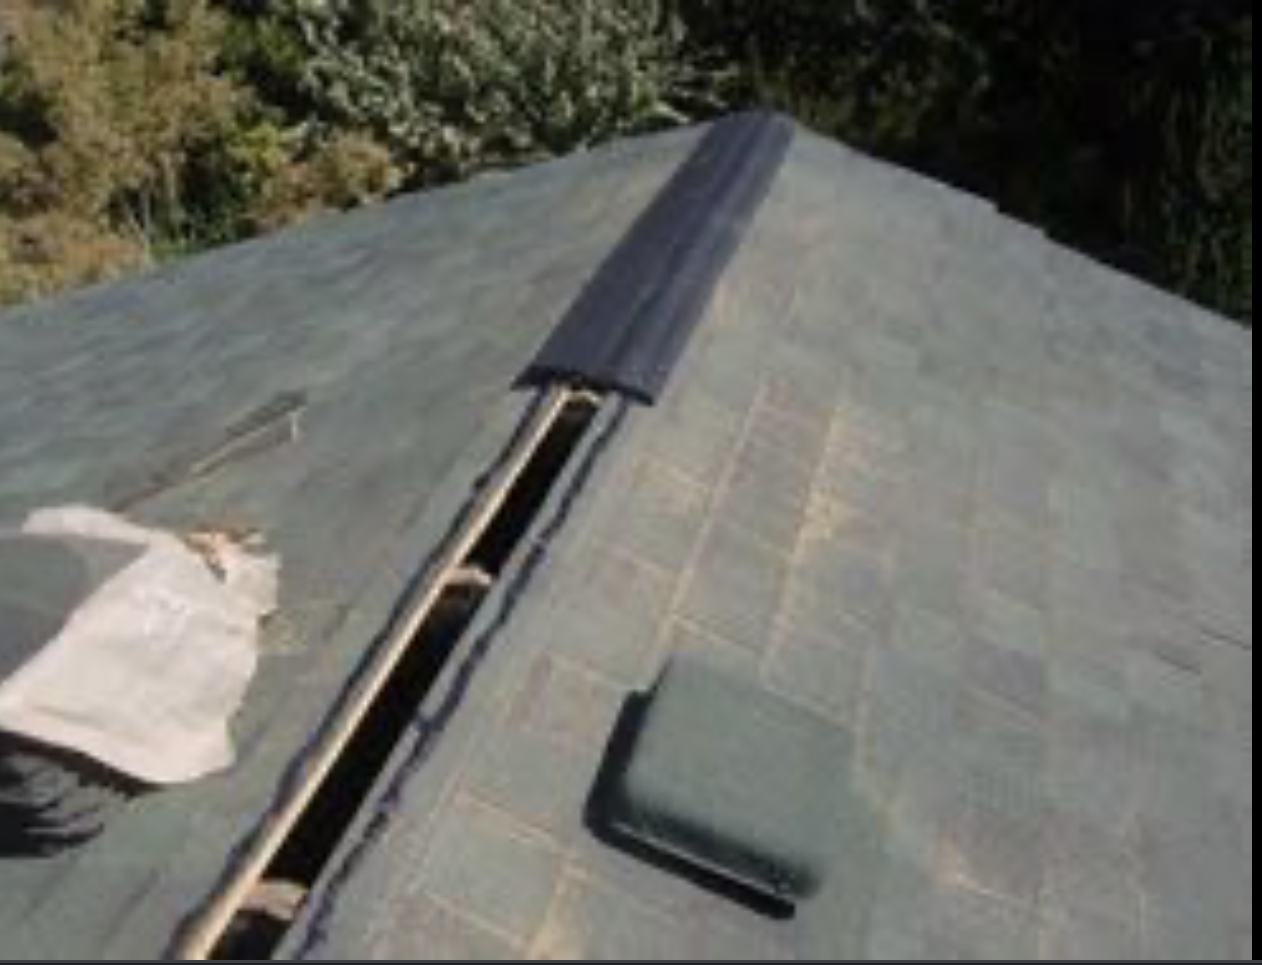 Ridge vent and ridge cap allow hot air to escape from the highest points of the attic while keeping water out and looking spiffy